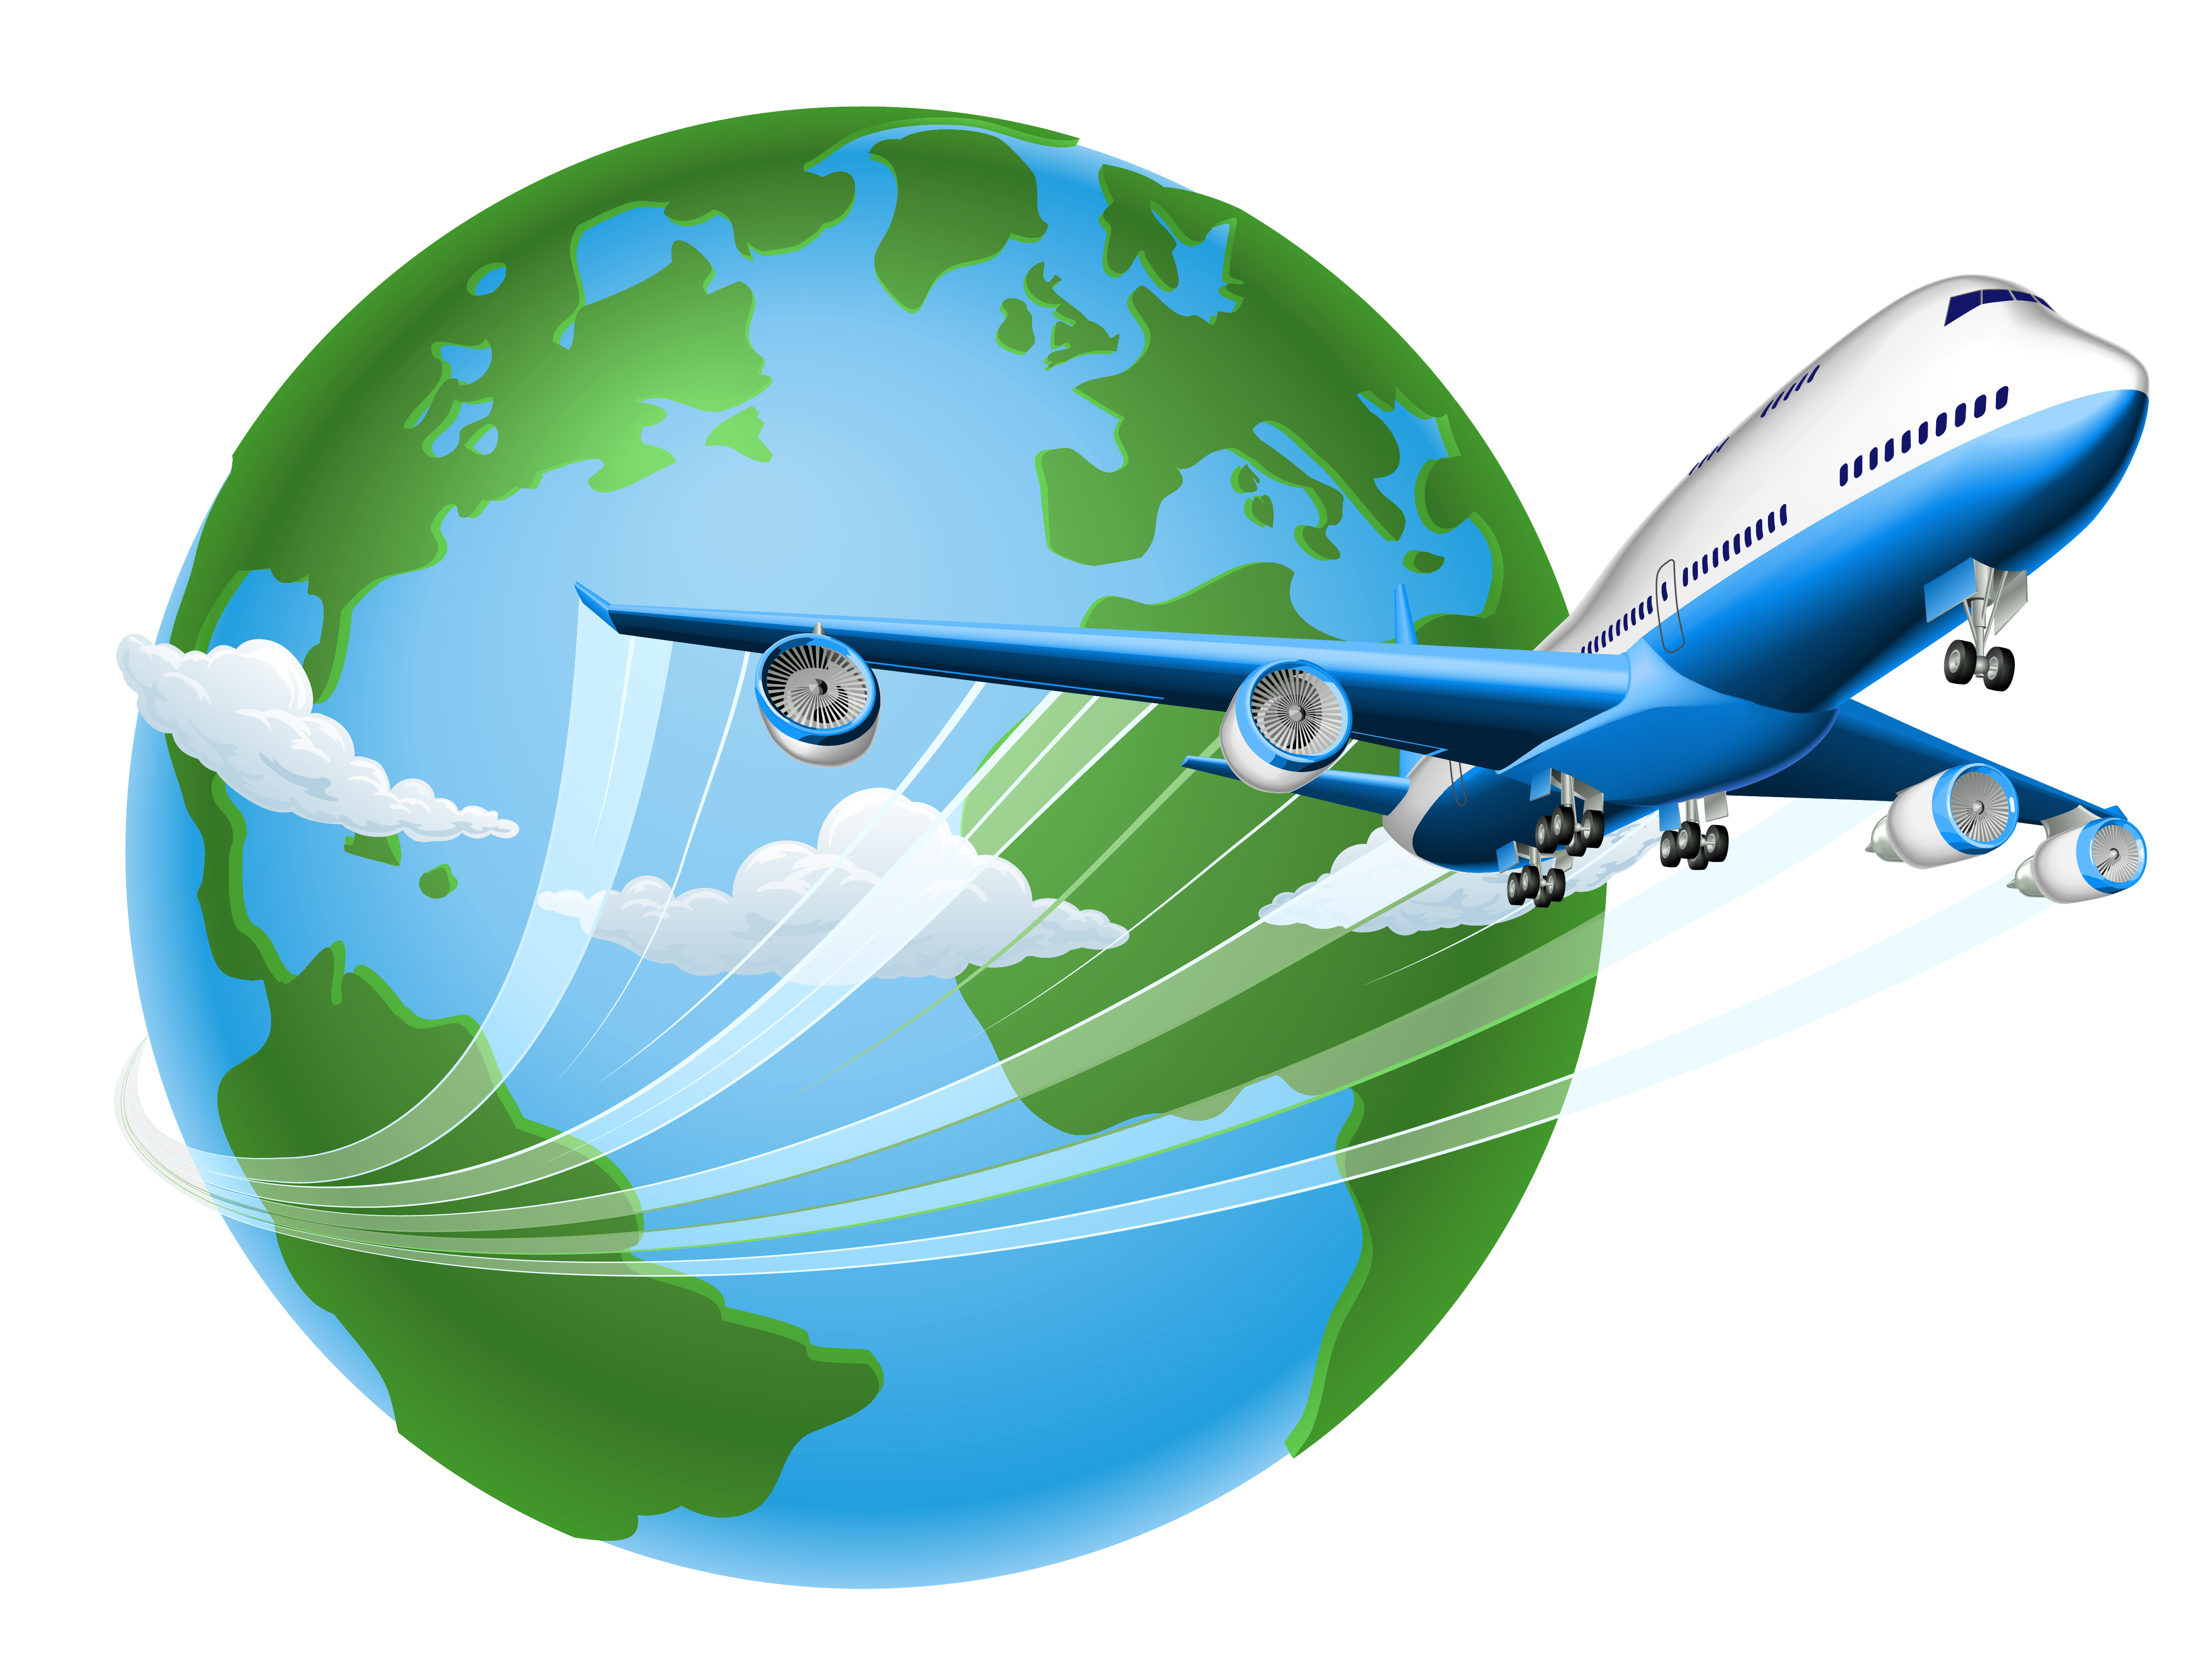 free travel clipart